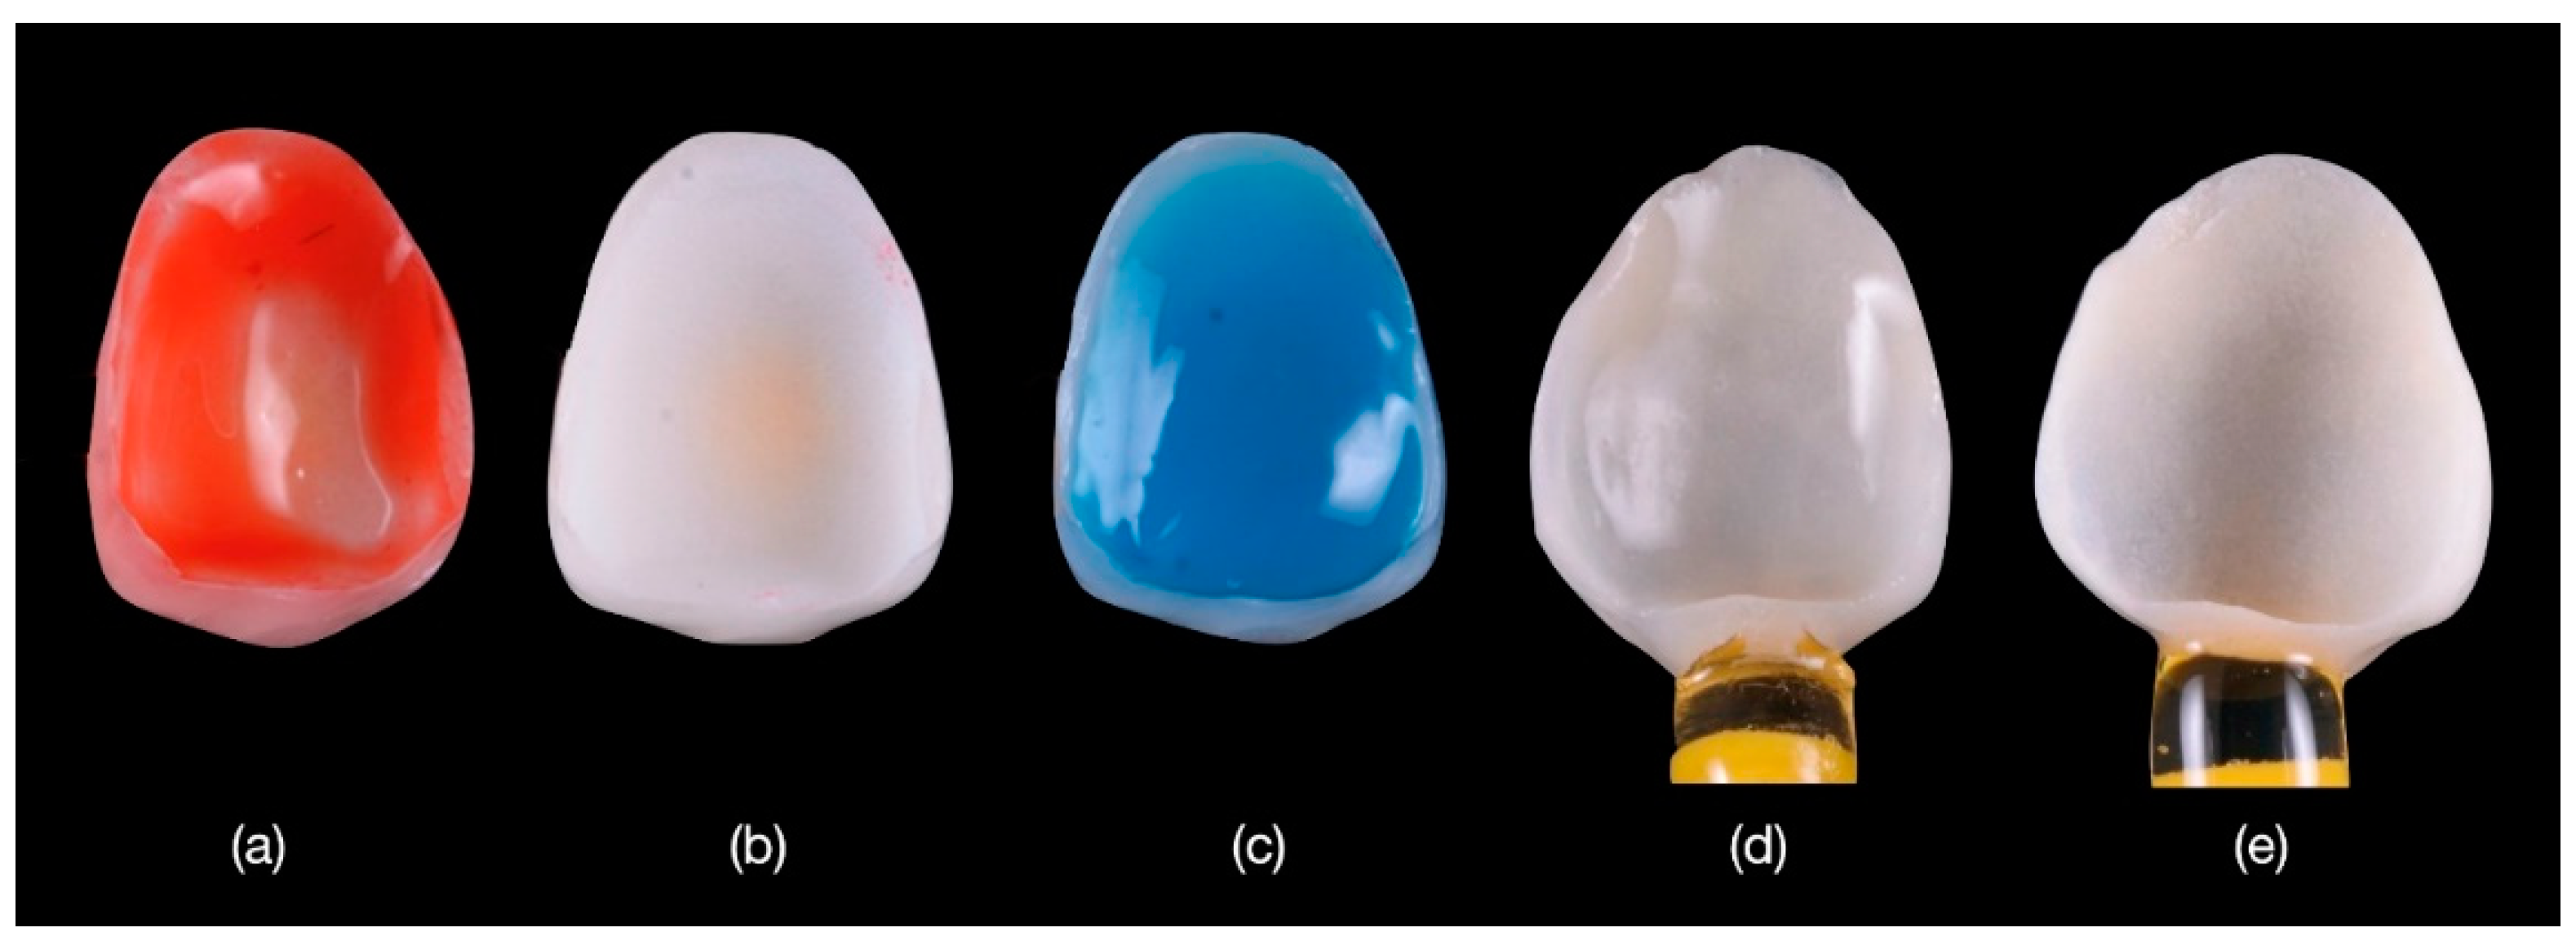 Materials | Free Full-Text | Retrospective Long-Term Clinical Outcome of Feldspathic  Ceramic Veneers | HTML